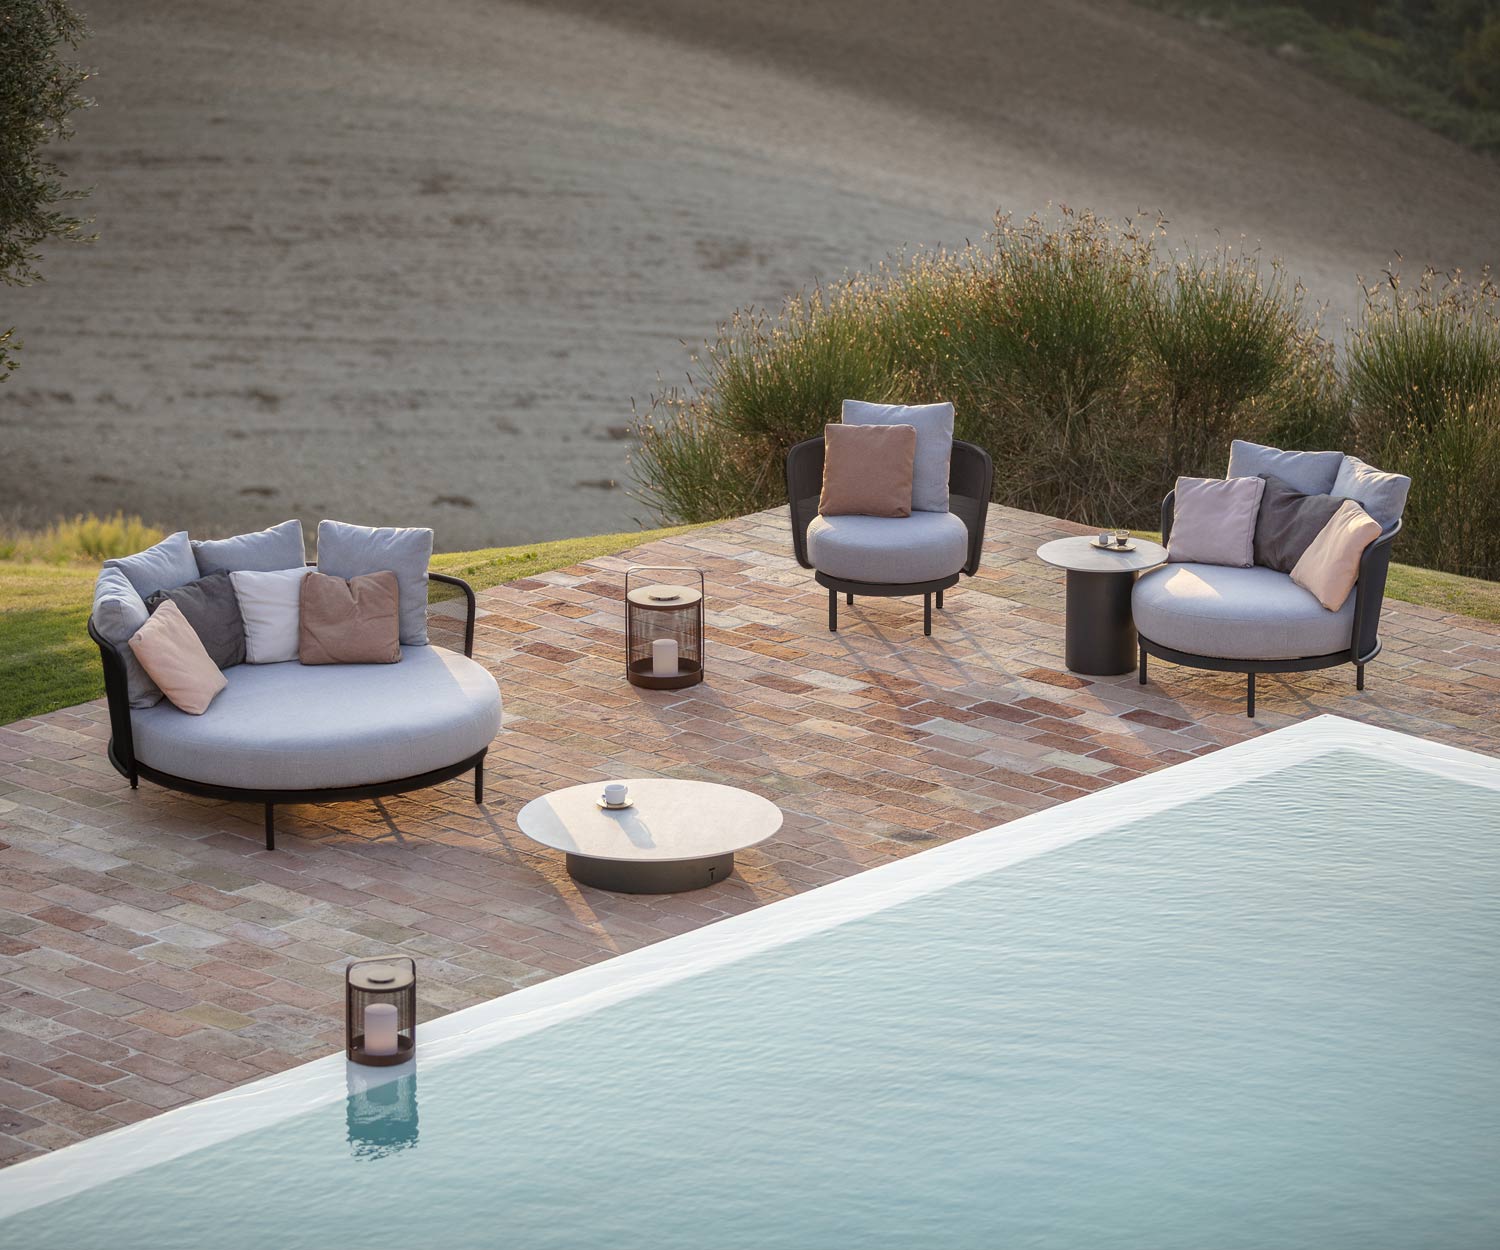 Garden Lounge Club Design Chair Baza from Todus by the pool on the terrace